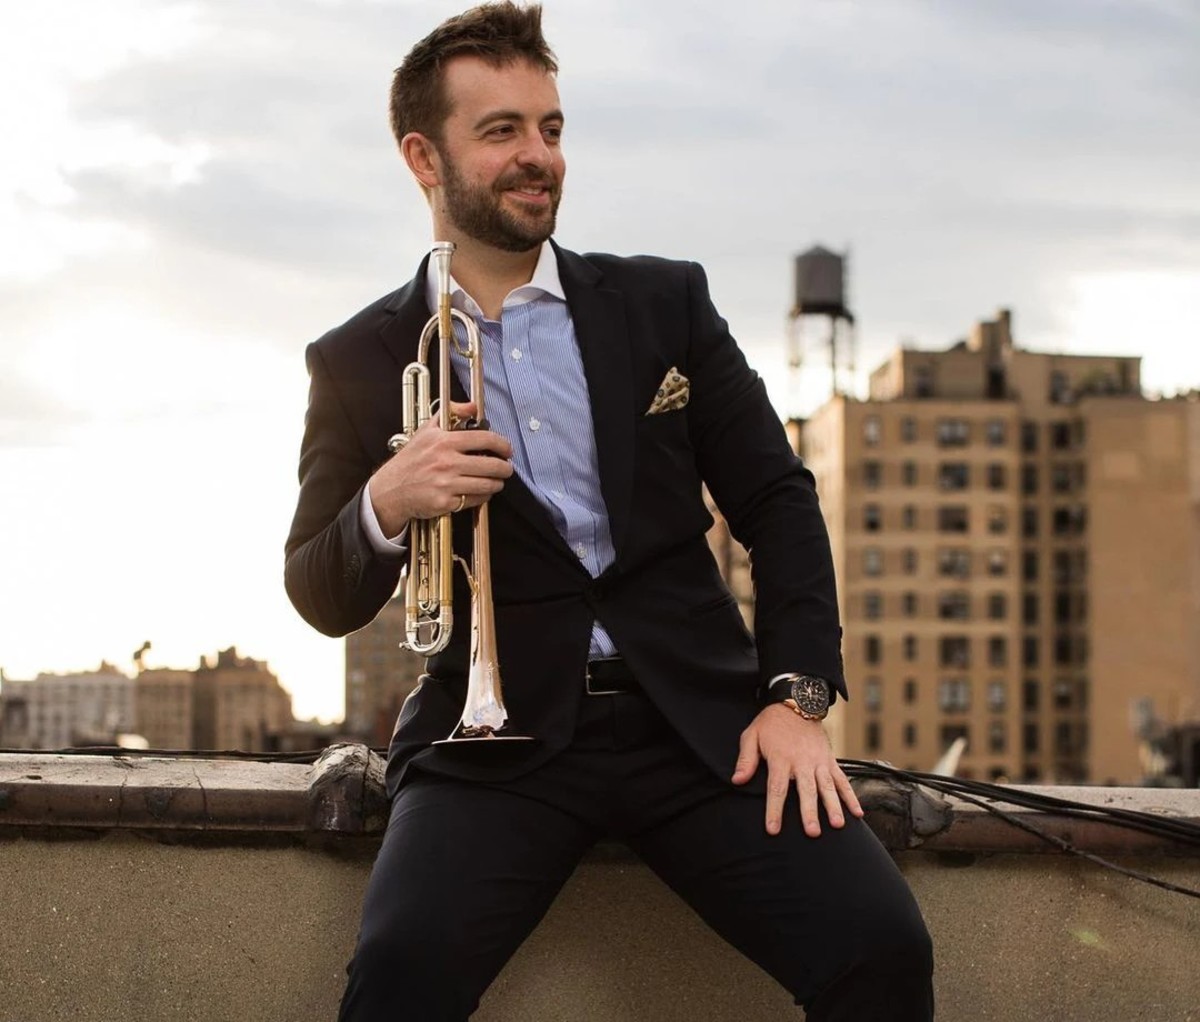 Man wearing suit sitting on rooftop with trumpet